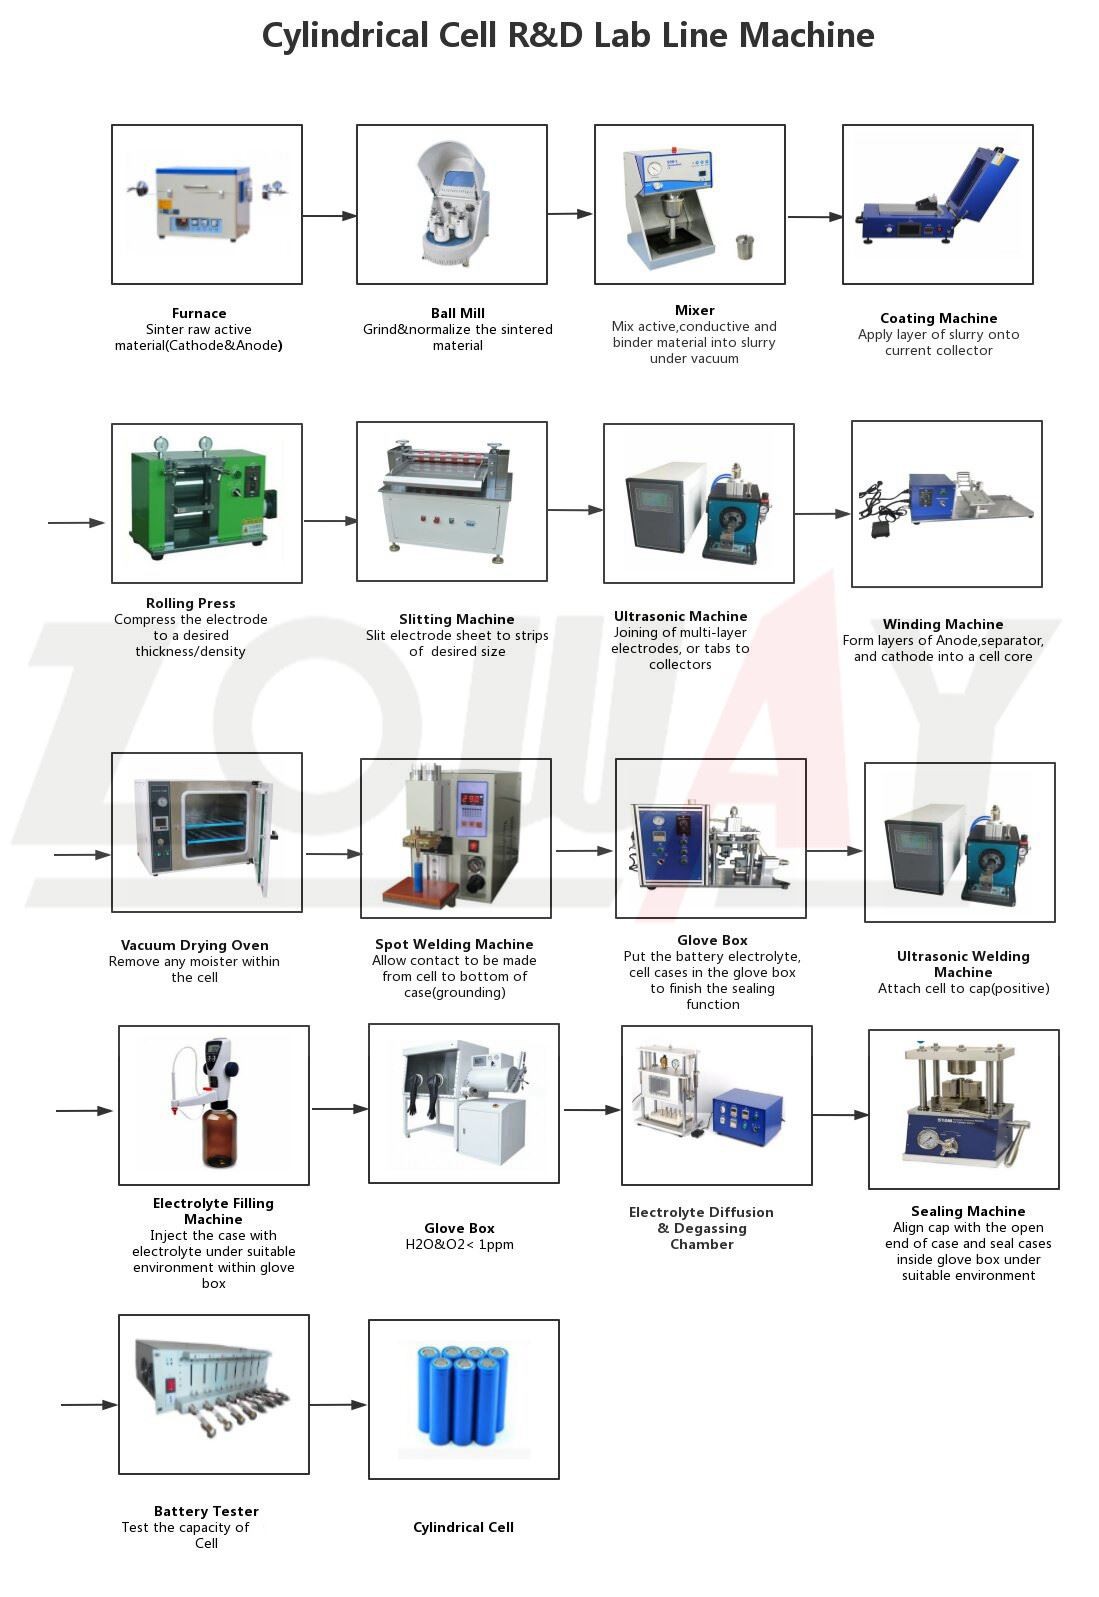 Cylindrical Cell Line Machine